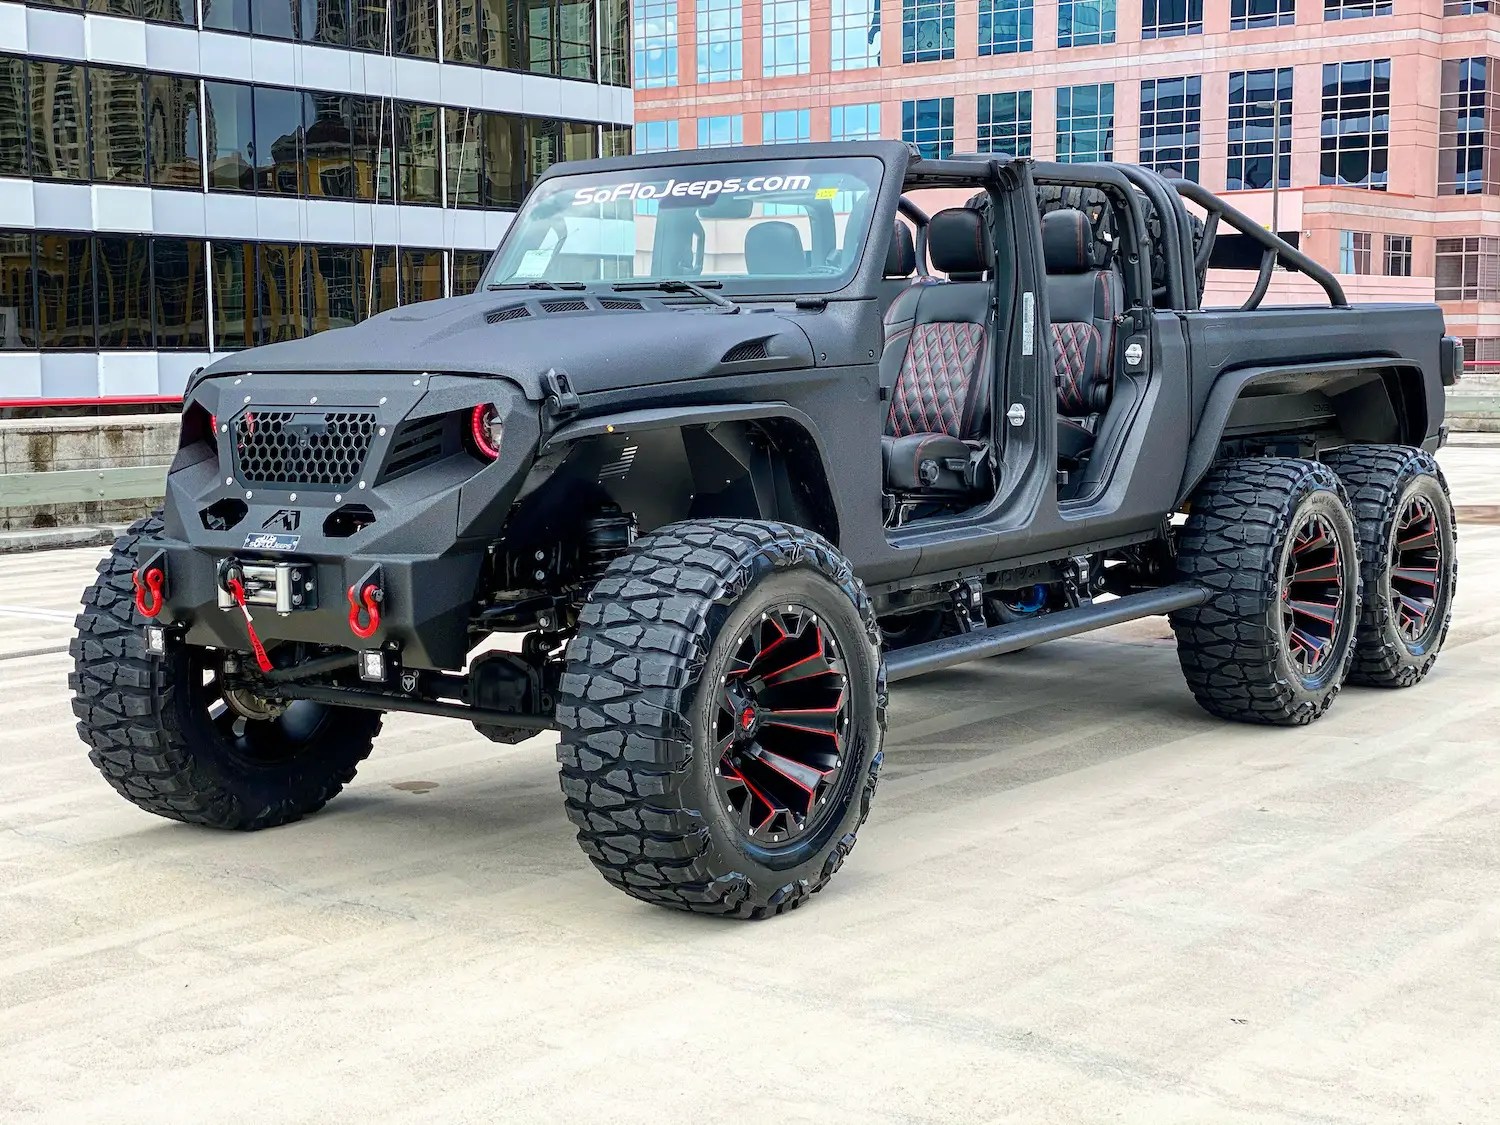 lamtac encounter muscle monster soflo jeeps builds a x wheels with hp engine block costing more than thousand dollars 64d5dfb3cf644 Encounter "muscle Monster" Soflo Jeeps Builds A 6x6 6 Wheels With 700 Hp Engine Block Costing More Than 400 Thousand Dollars